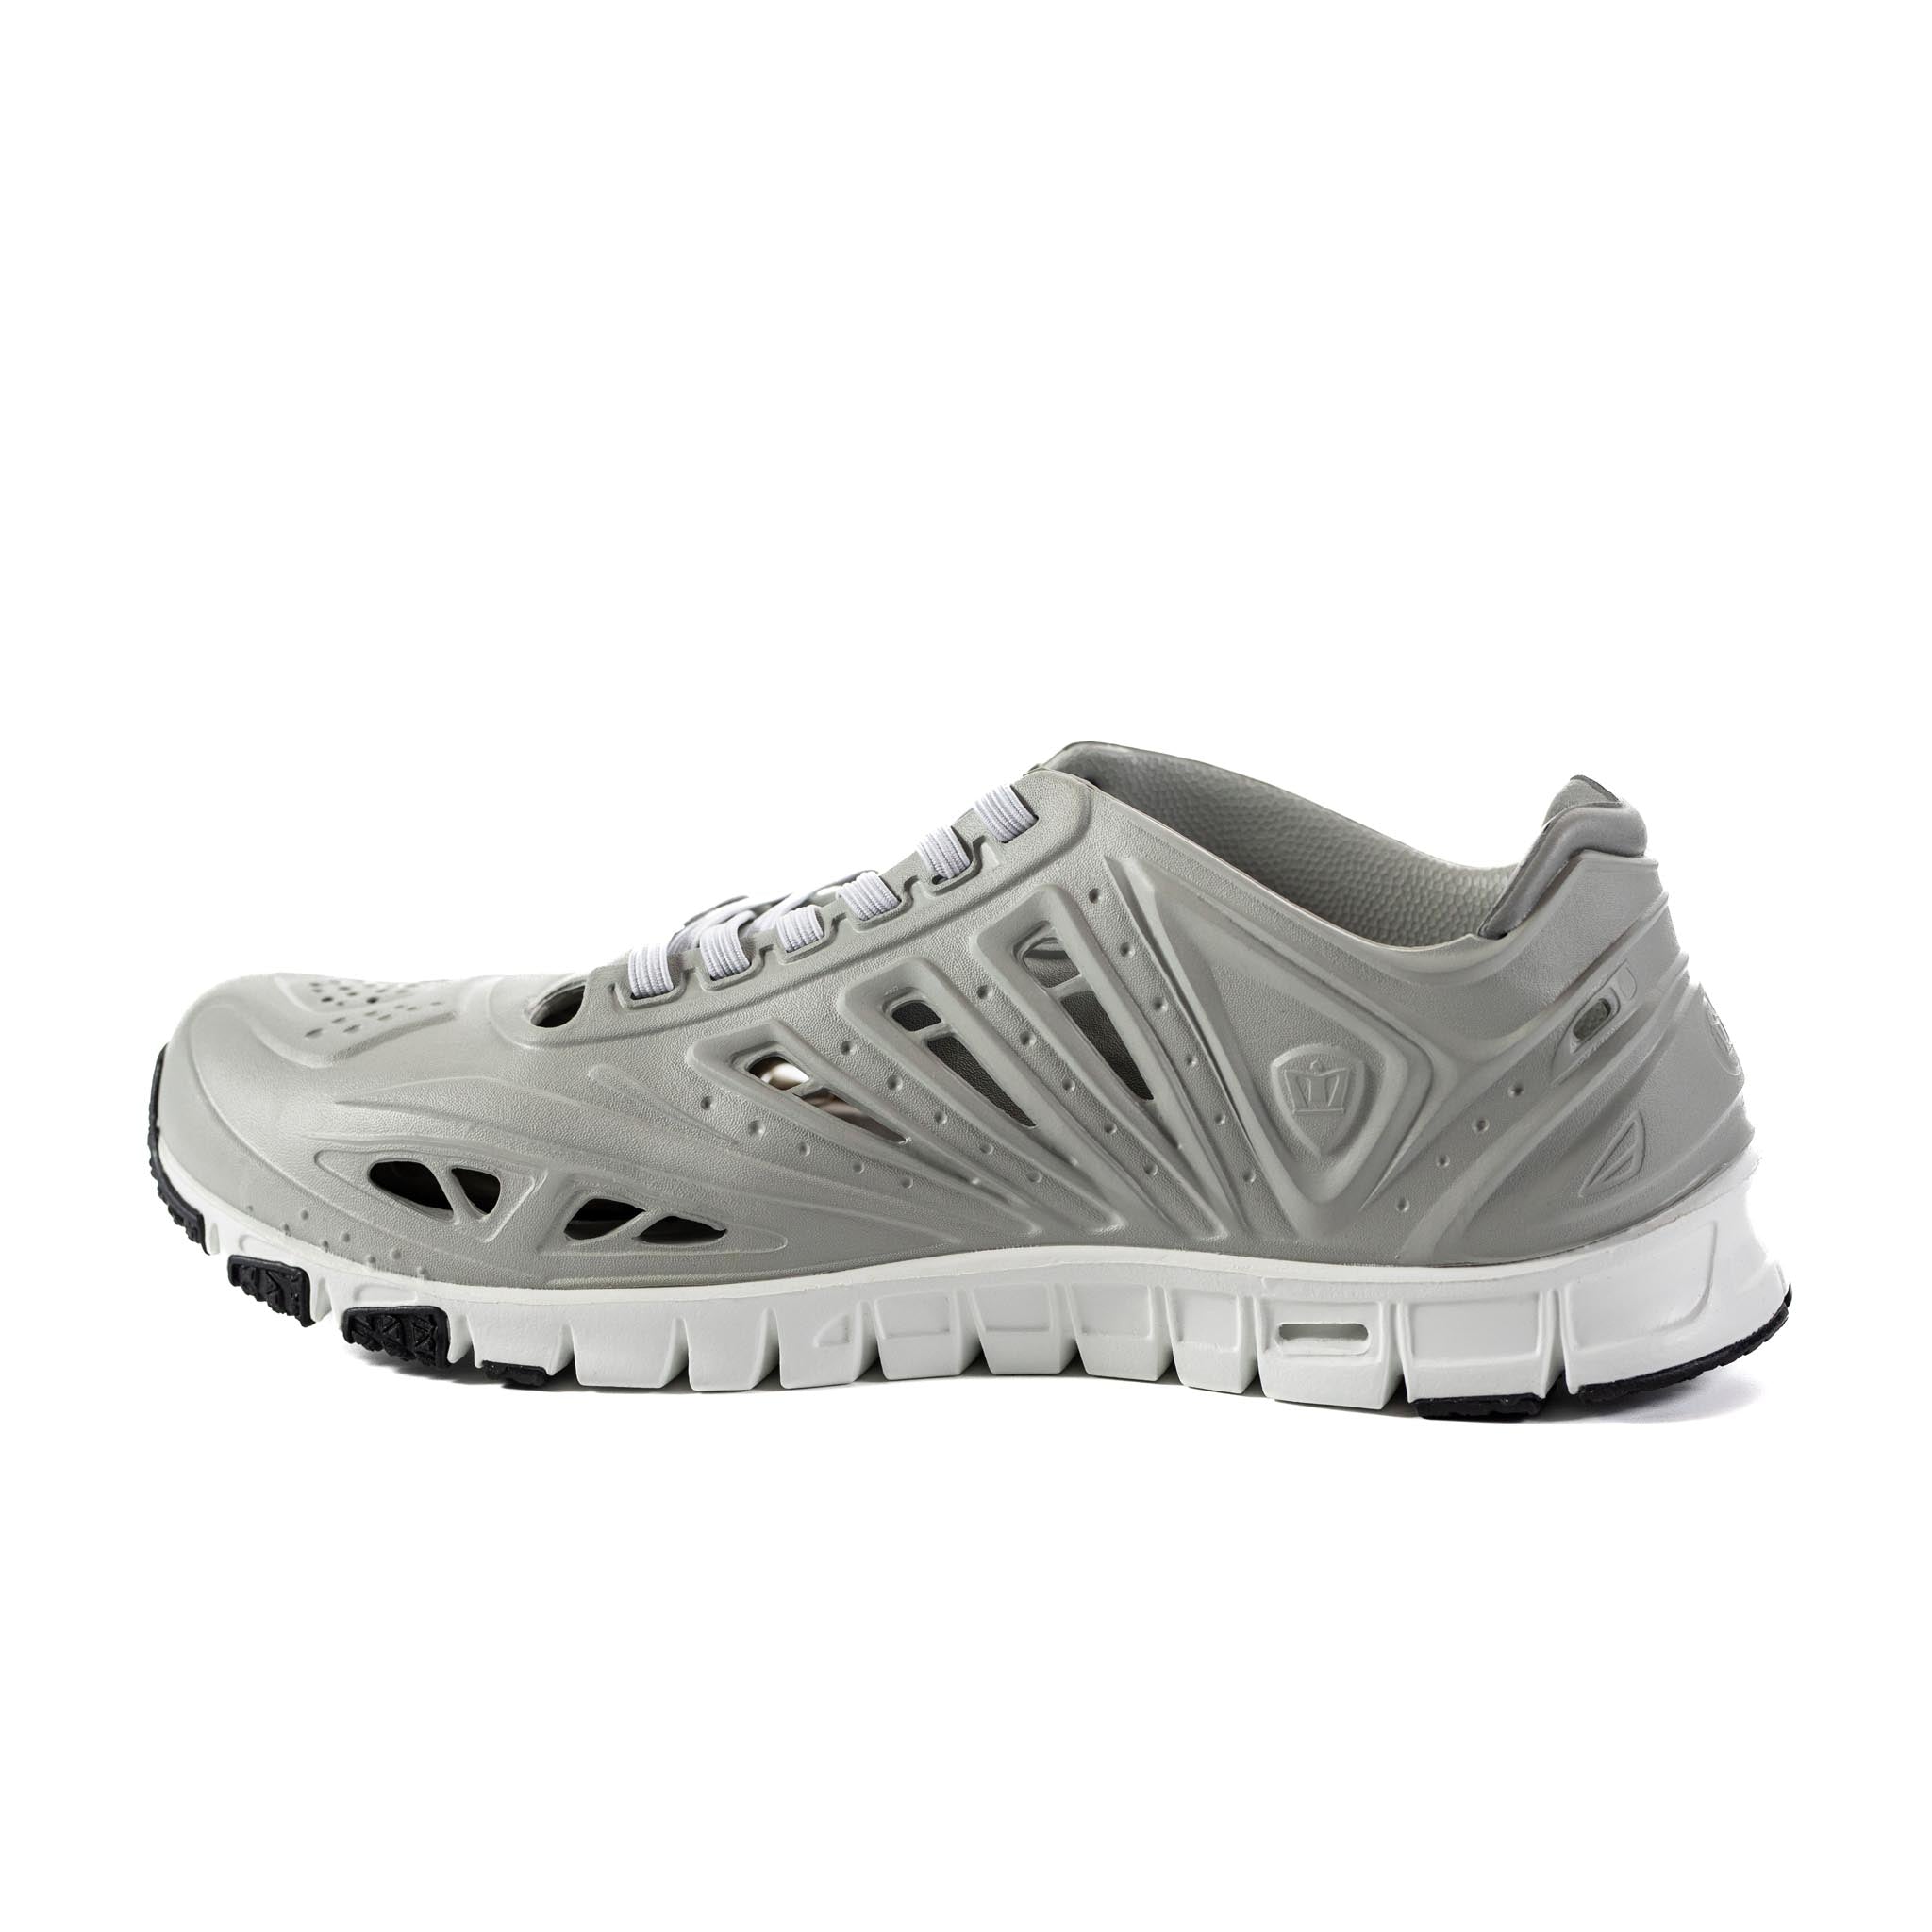 APX Closed Toe Lace Up Water Shoes for Women